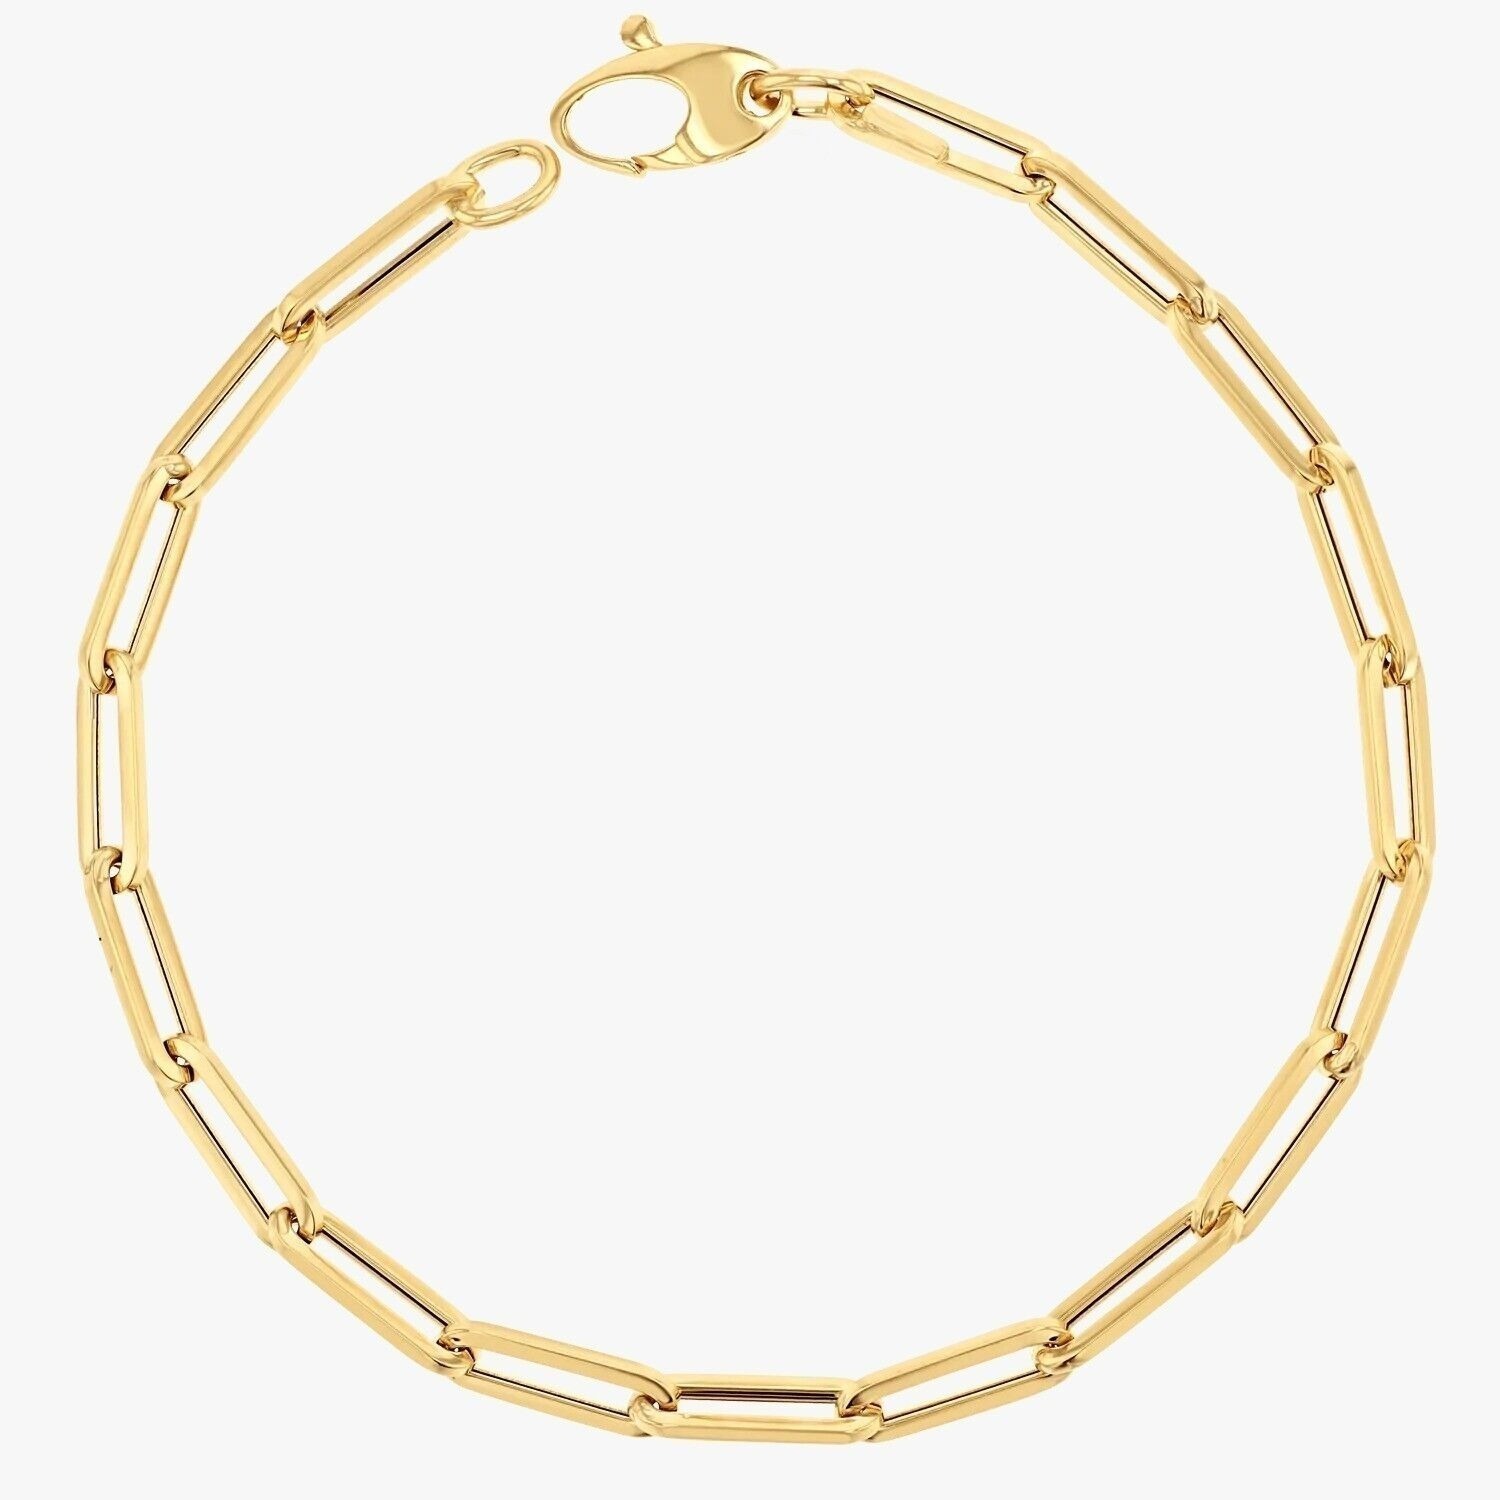 Women's 14KT Yellow Gold Solid Paperclip Bracelet $115 + Free Shipping